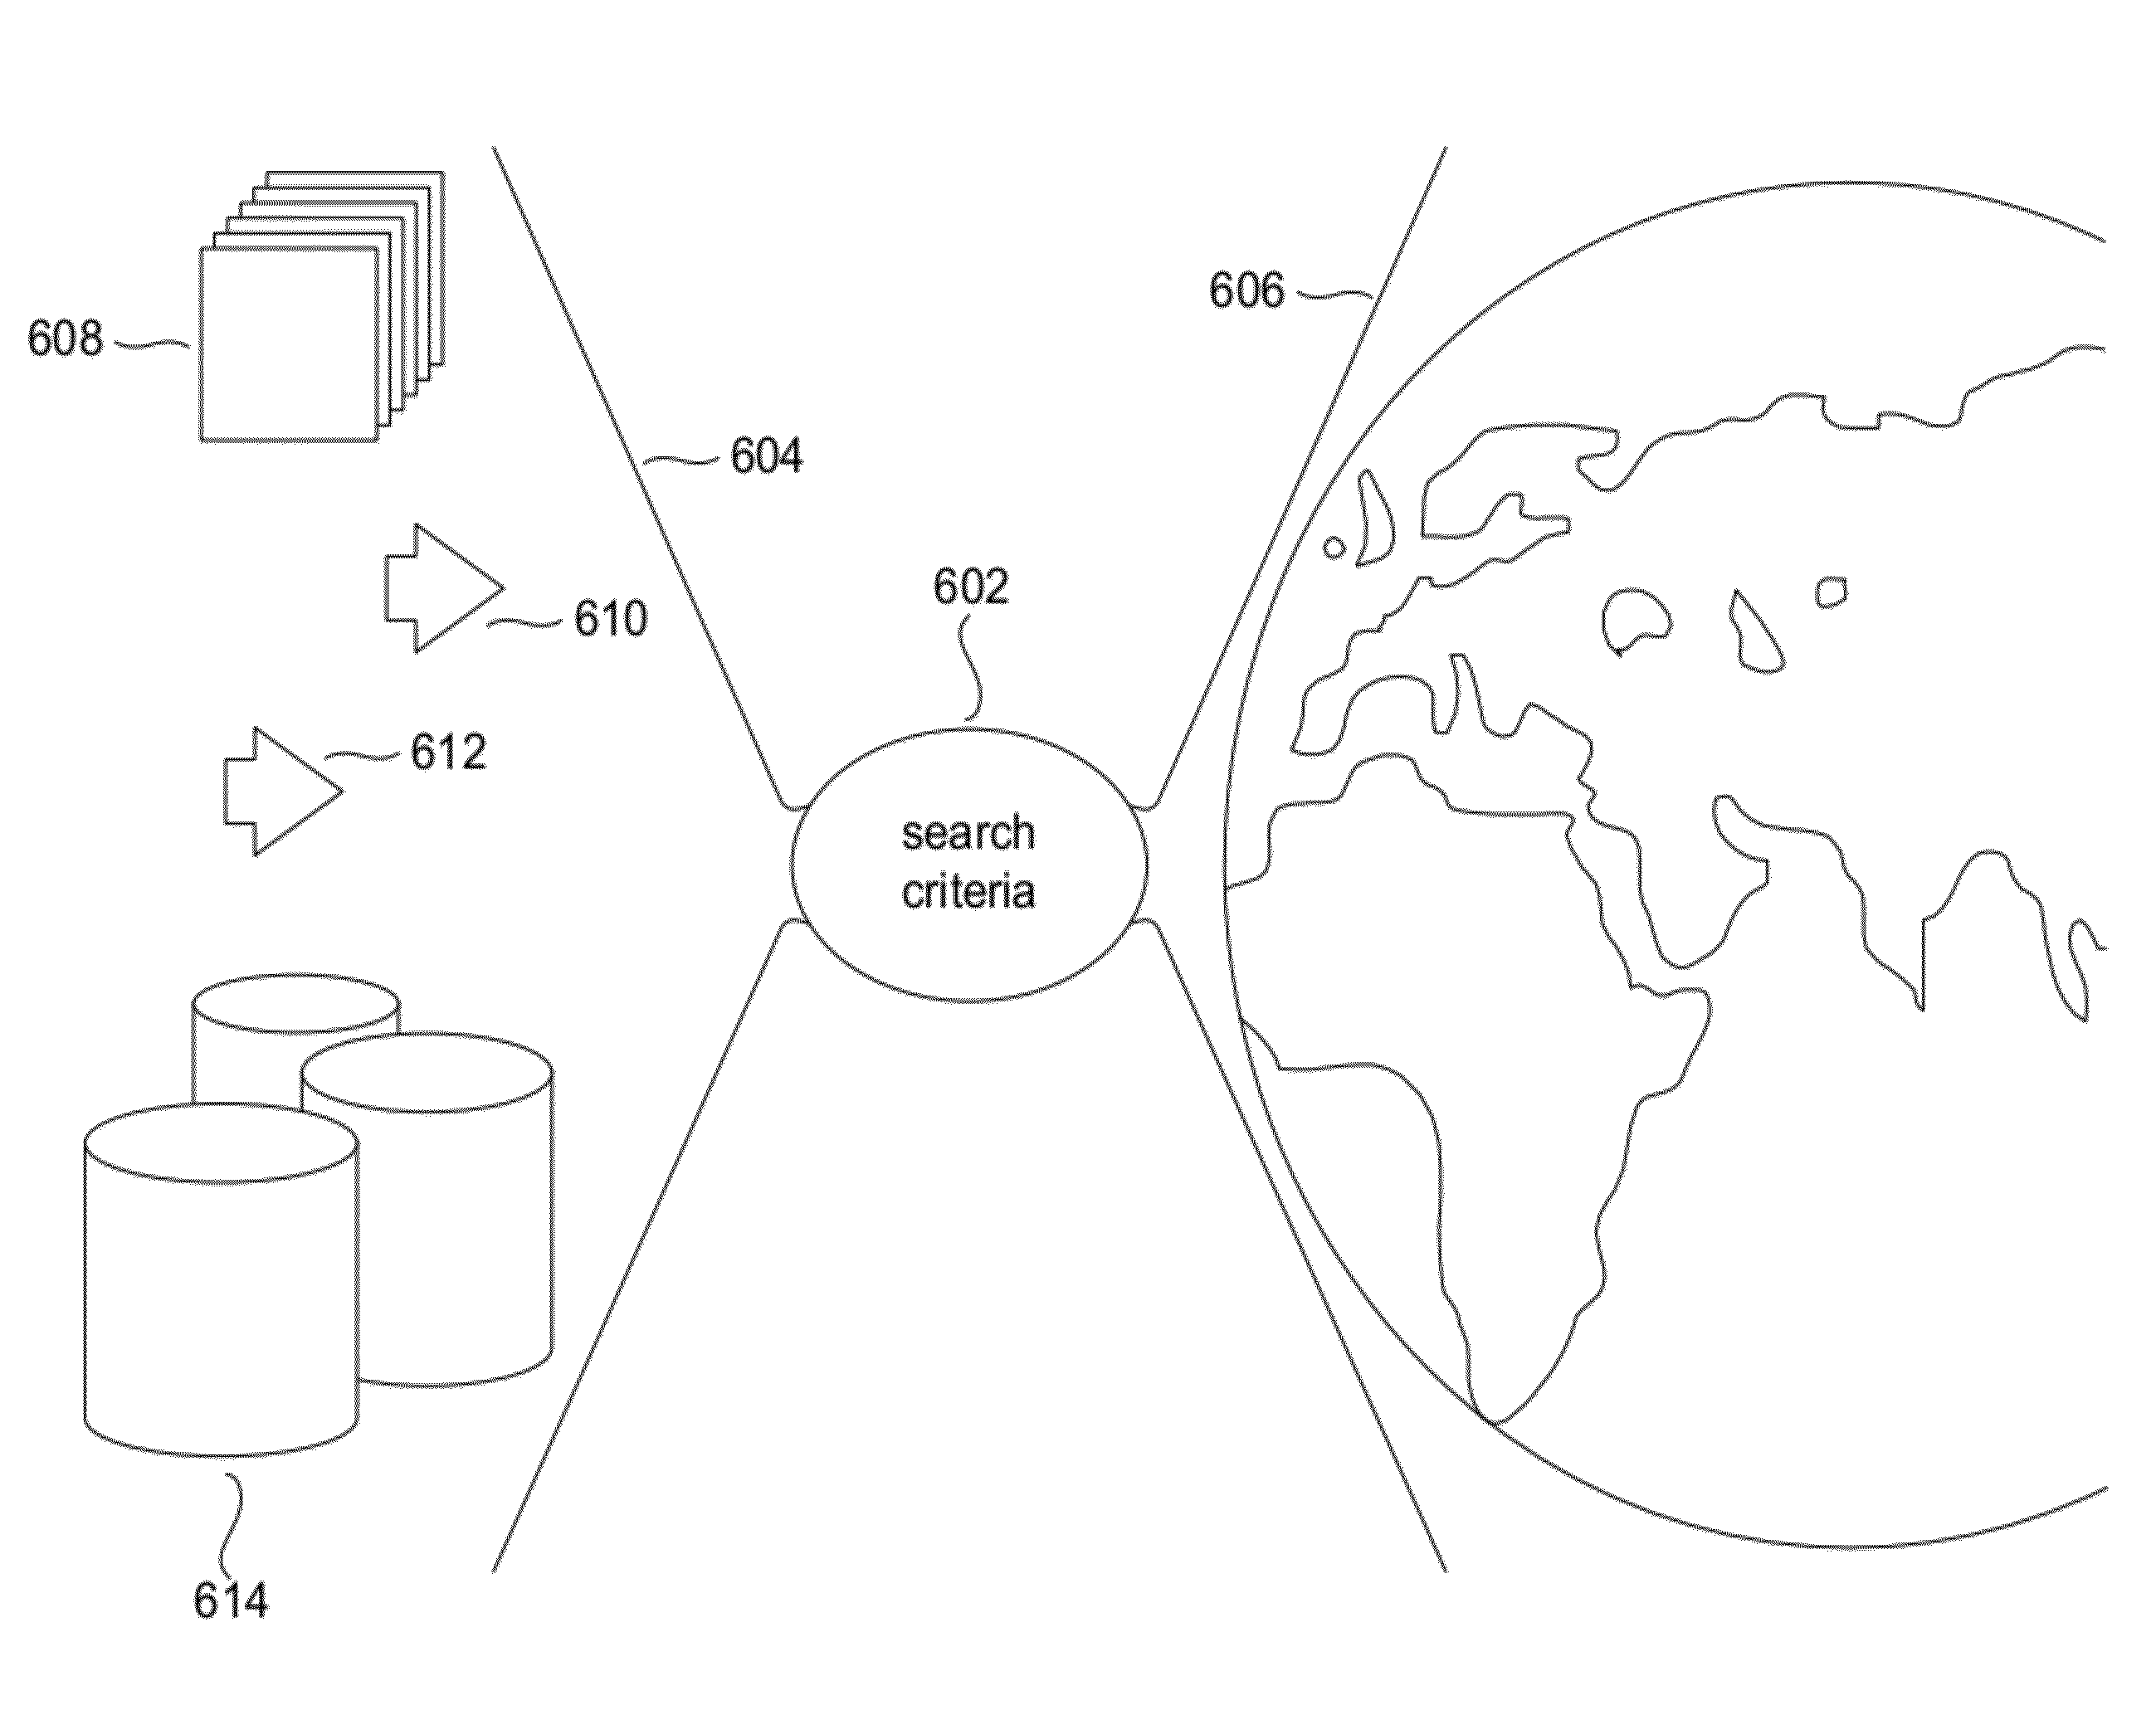 Method and System for Automated Search for, and Retrieval and Distribution of, Information